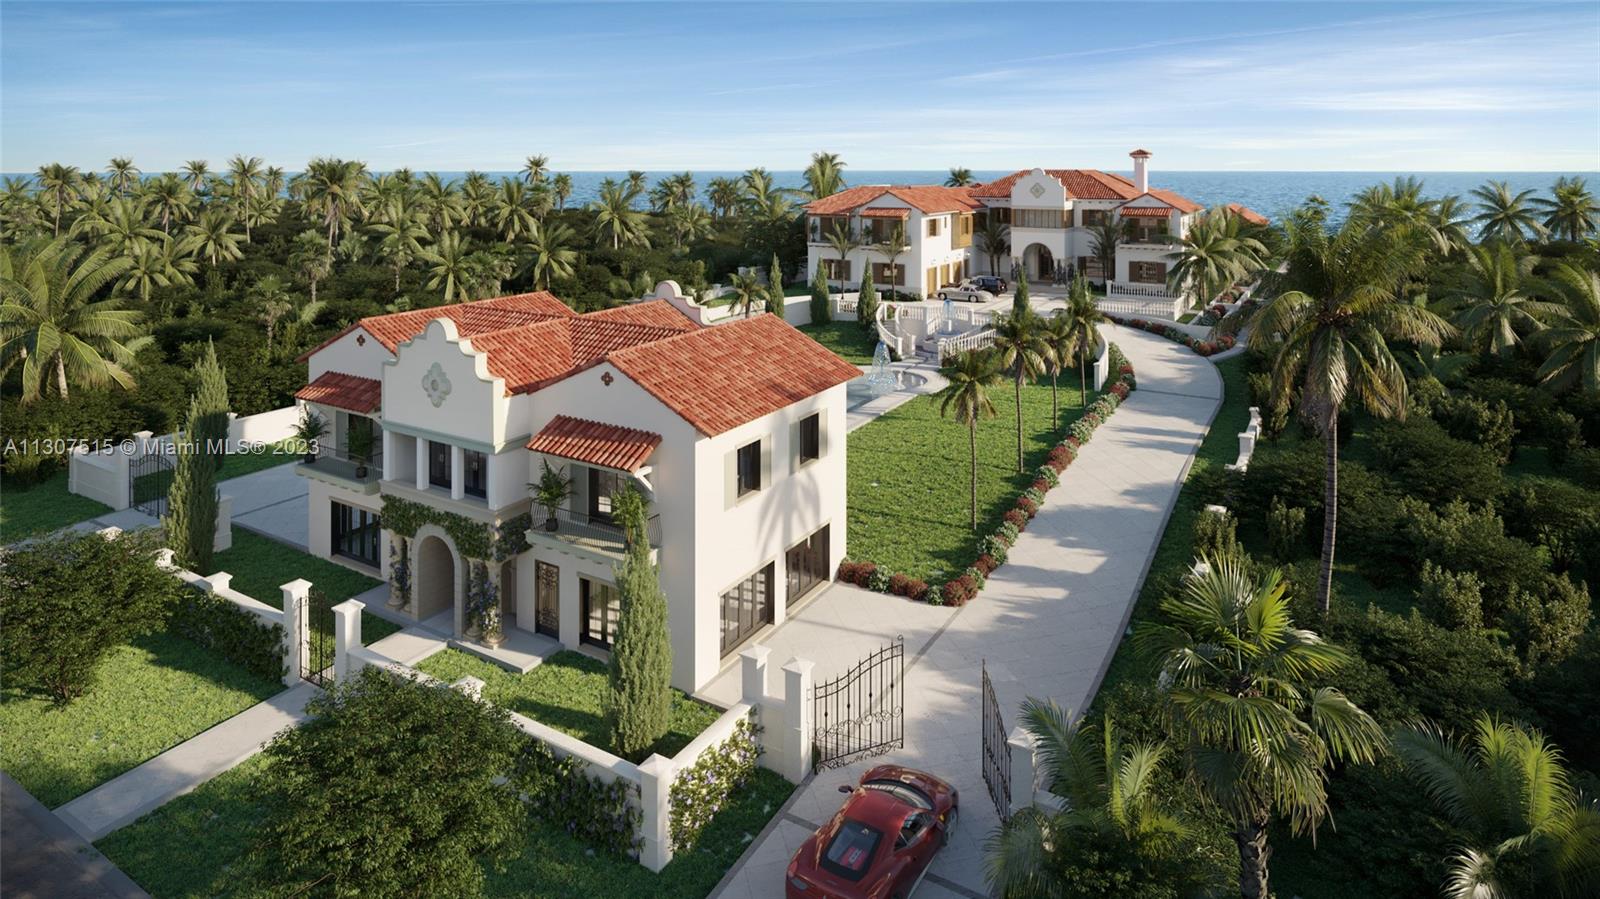 Welcome to Villa Azur, a new Mediterranean Revival estate that will bring you back to the Addison Mizner times, where charm and sophistication meet state-of-the art technology and elegance. Exquisite Chanel themed interiors, that will transition seamlessly to a breathtaking lush backyard with 150' of direct ocean and an infinity edge pool. A symmetrical design that will greet you at the entrance of the compound and will accompany you throughout the estate. Loggia to dine al fresco and an amazing terrace off the primary bedroom overlooking the Atlantic. Relax with your family and friends in the Great Room or in the Champagne Room overlooking the amazing sunsets. A spacious garage that can be configured to accommodate 12 cars. Gym, library, theater, a game room, and a 1k bottle wine cellar.